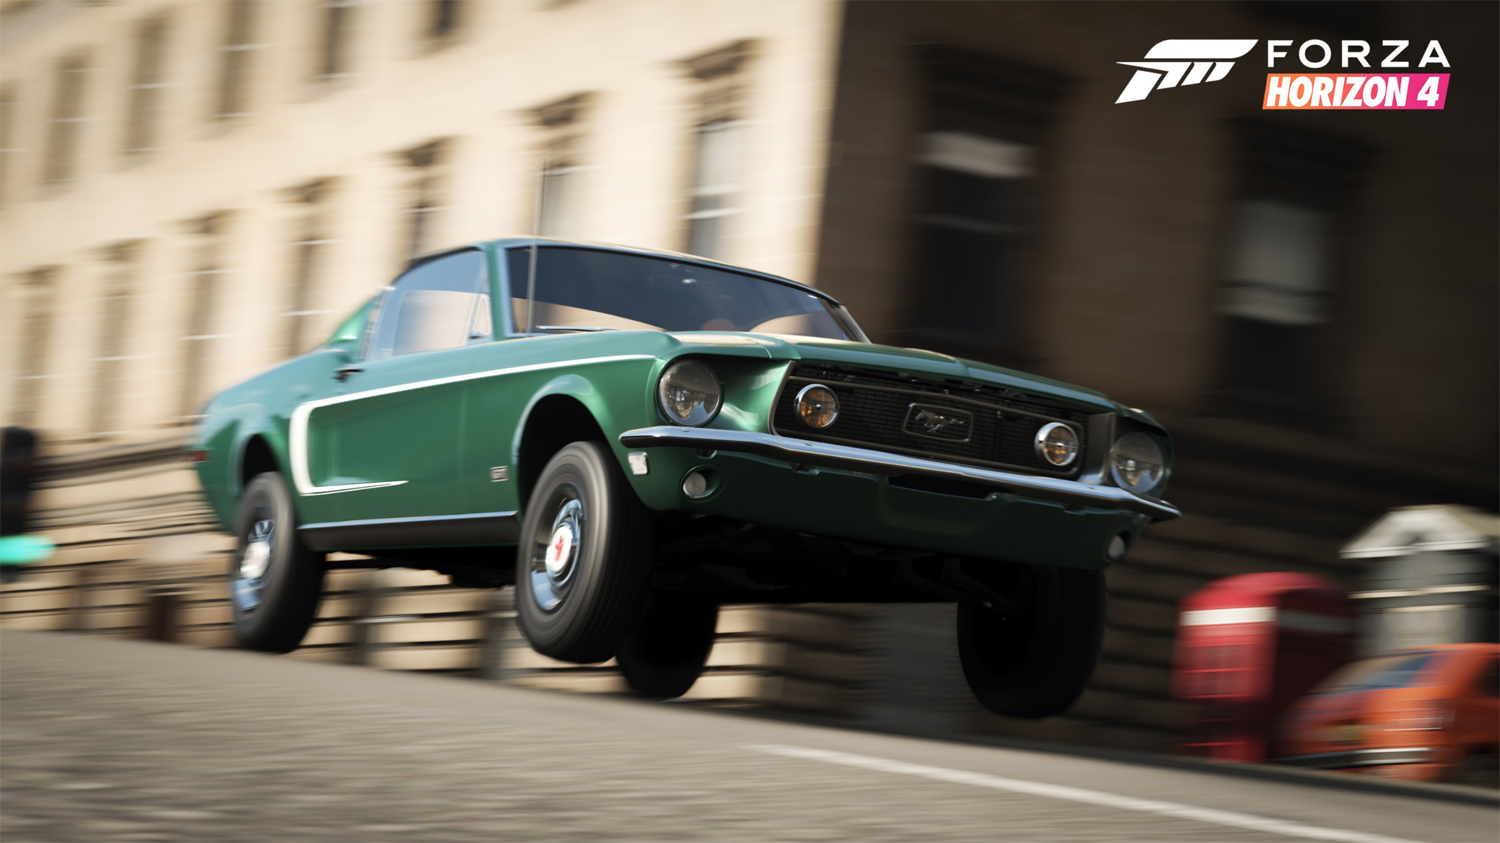 Ford Mustang Mach-E 1400 To Join Forza Horizon 5 Vehicle Roster